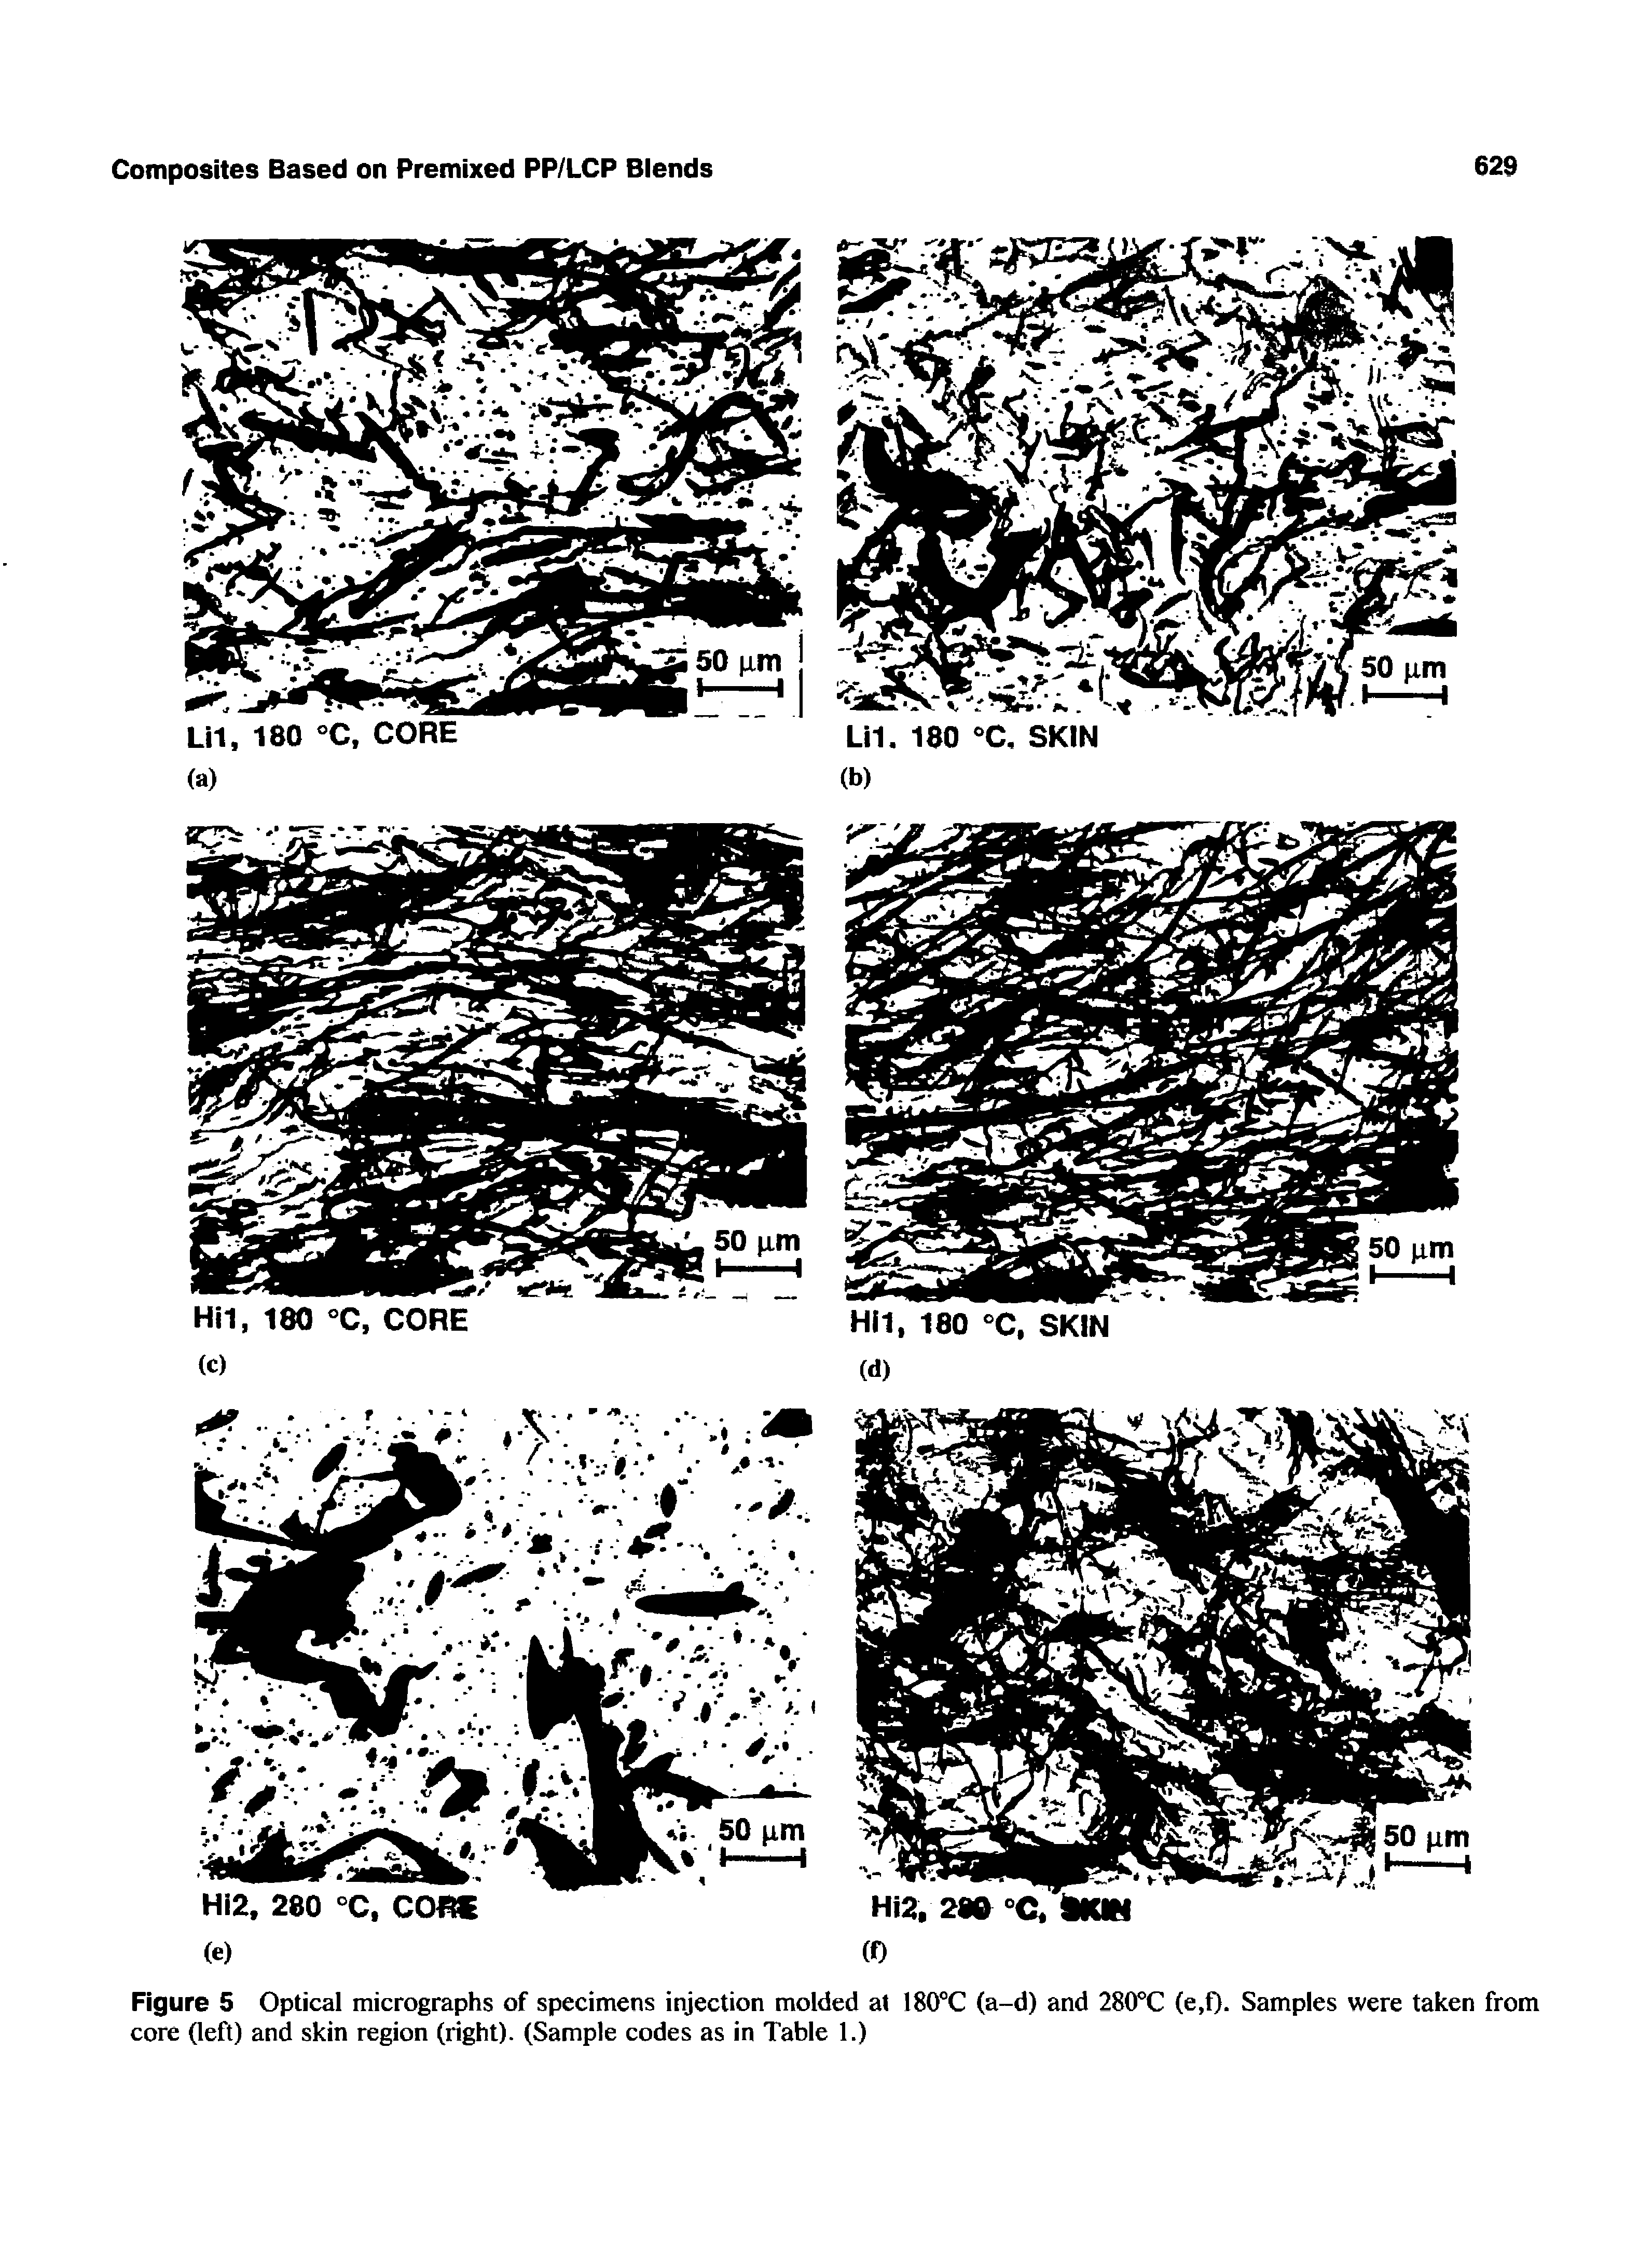 Figure 5 Optical micrographs of specimens injection molded at 180°C (a-d) and 280°C (e,t). Samples were taken from core (left) and skin region (right). (Sample codes as in Table 1.)...